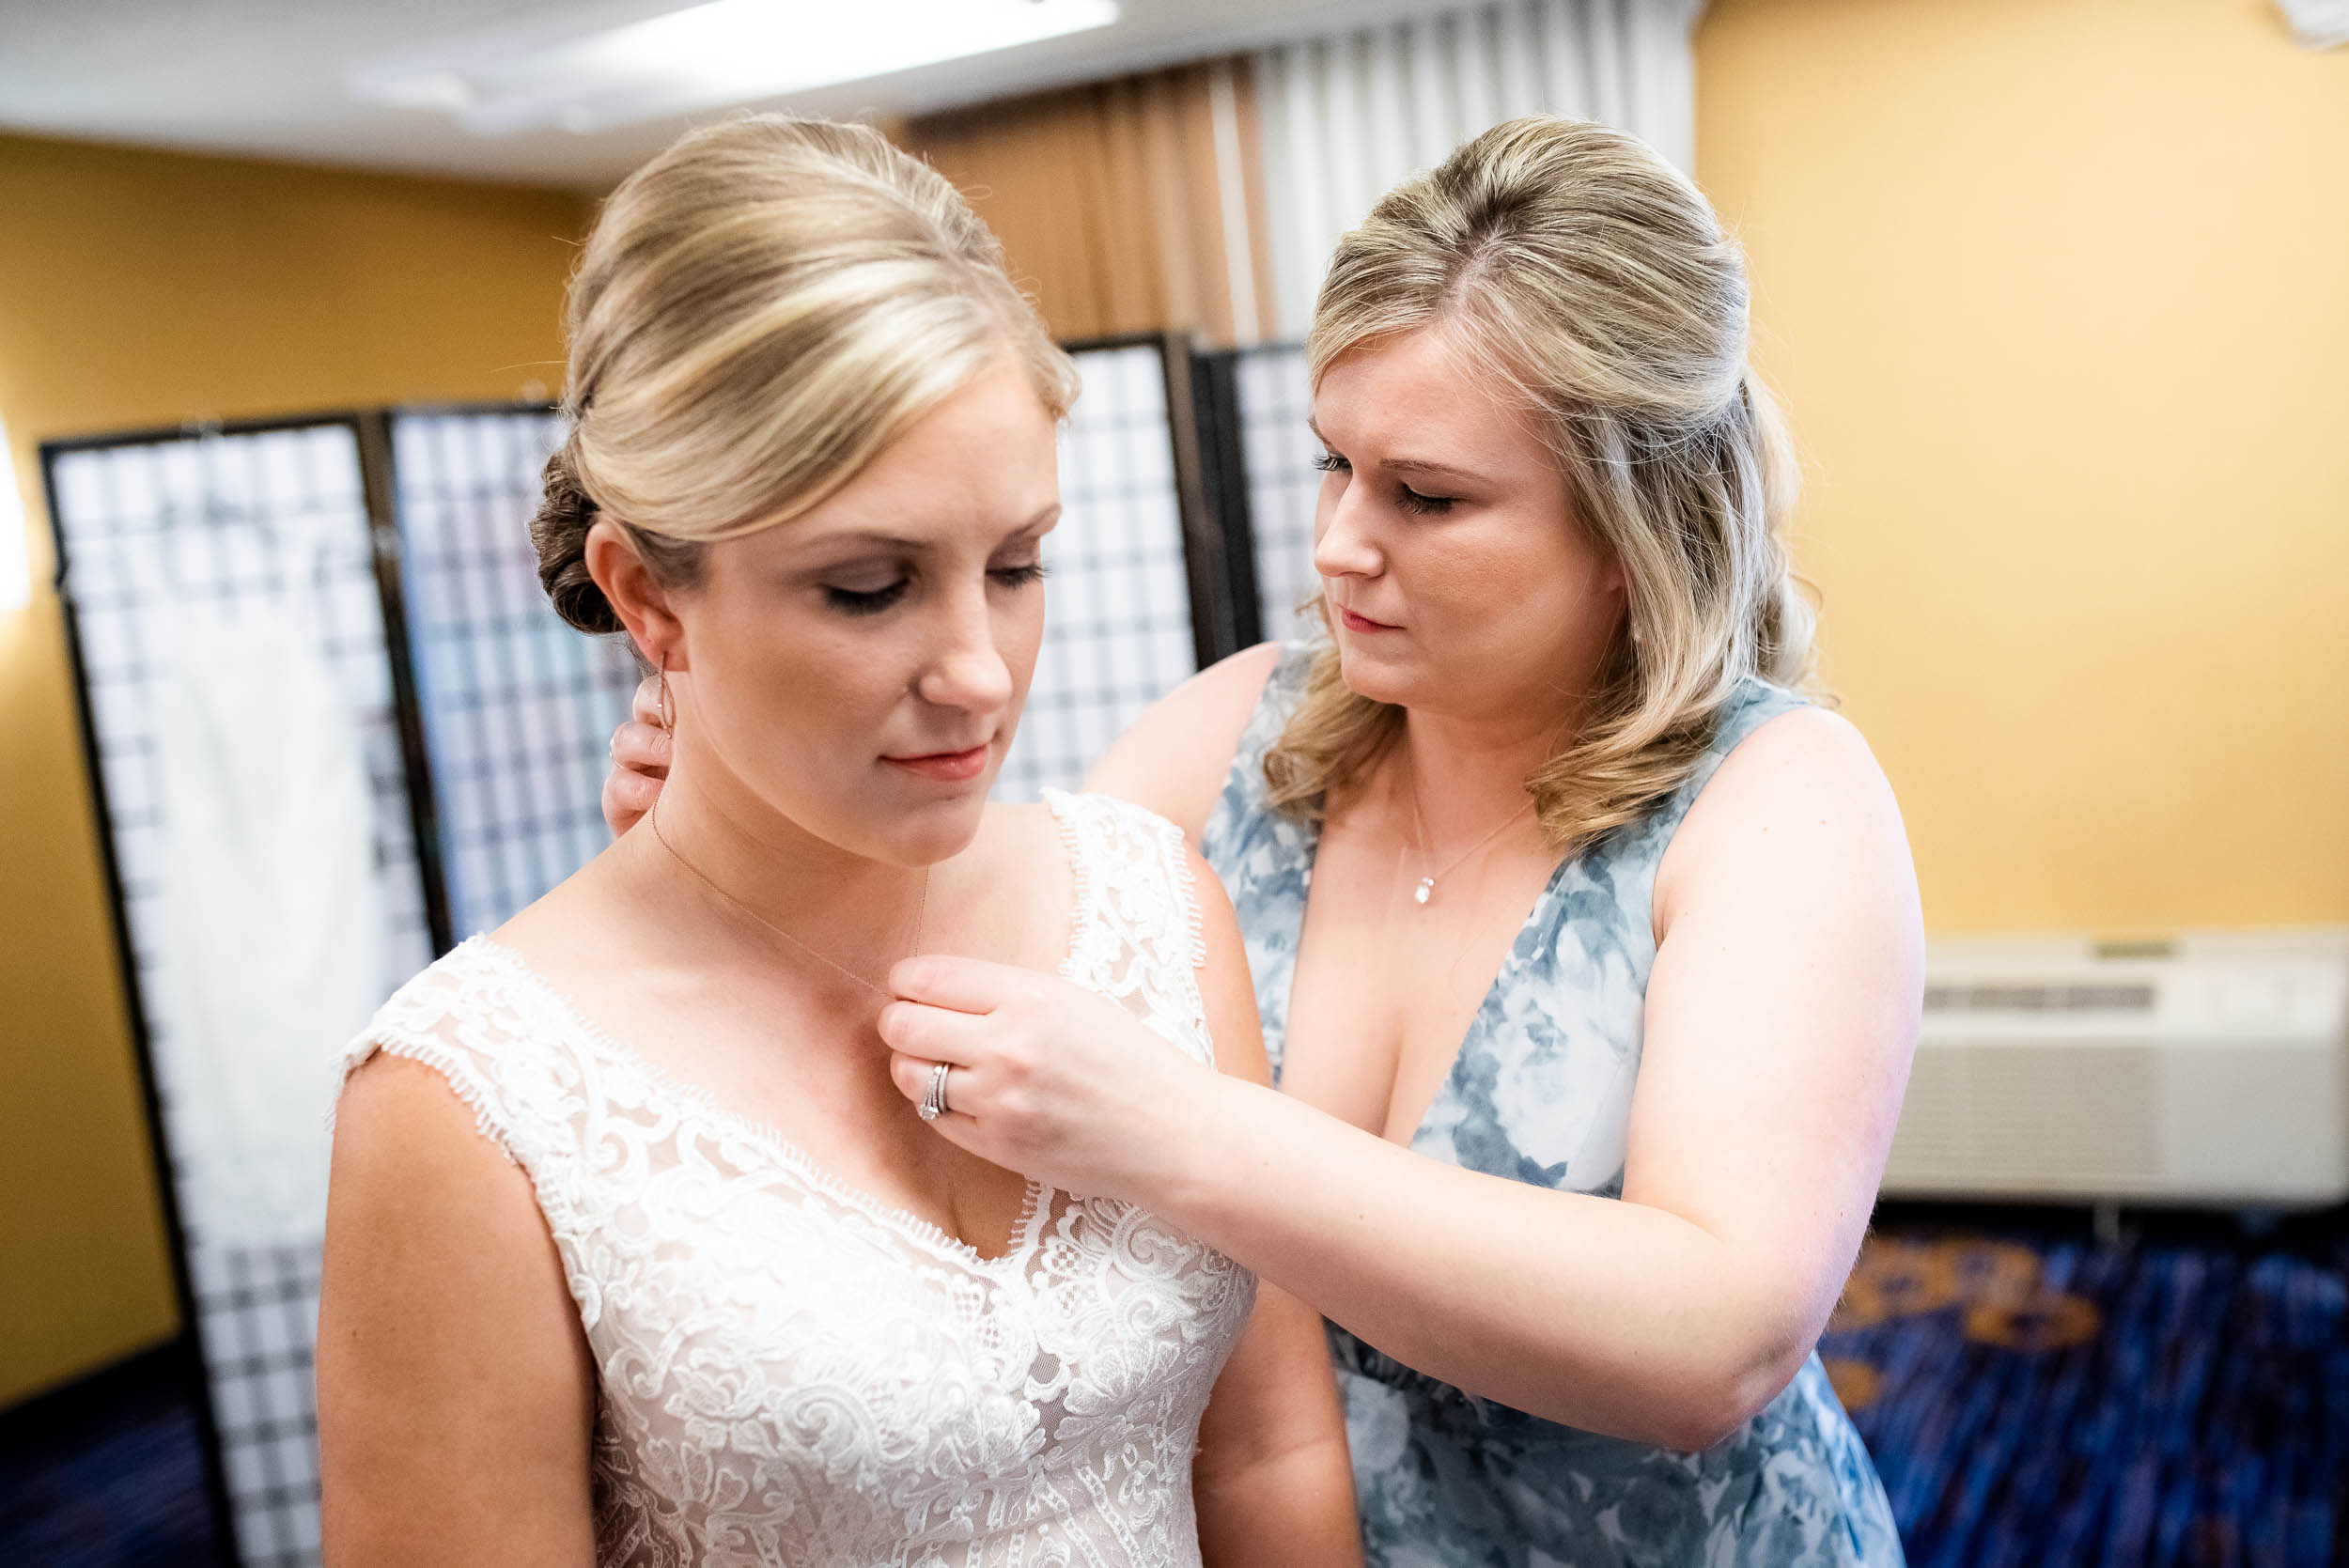 Bride getting ready: Modern industrial Chicago wedding inside Prairie Street Brewhouse captured by J. Brown Photography. Find more wedding ideas at jbrownphotography.com!